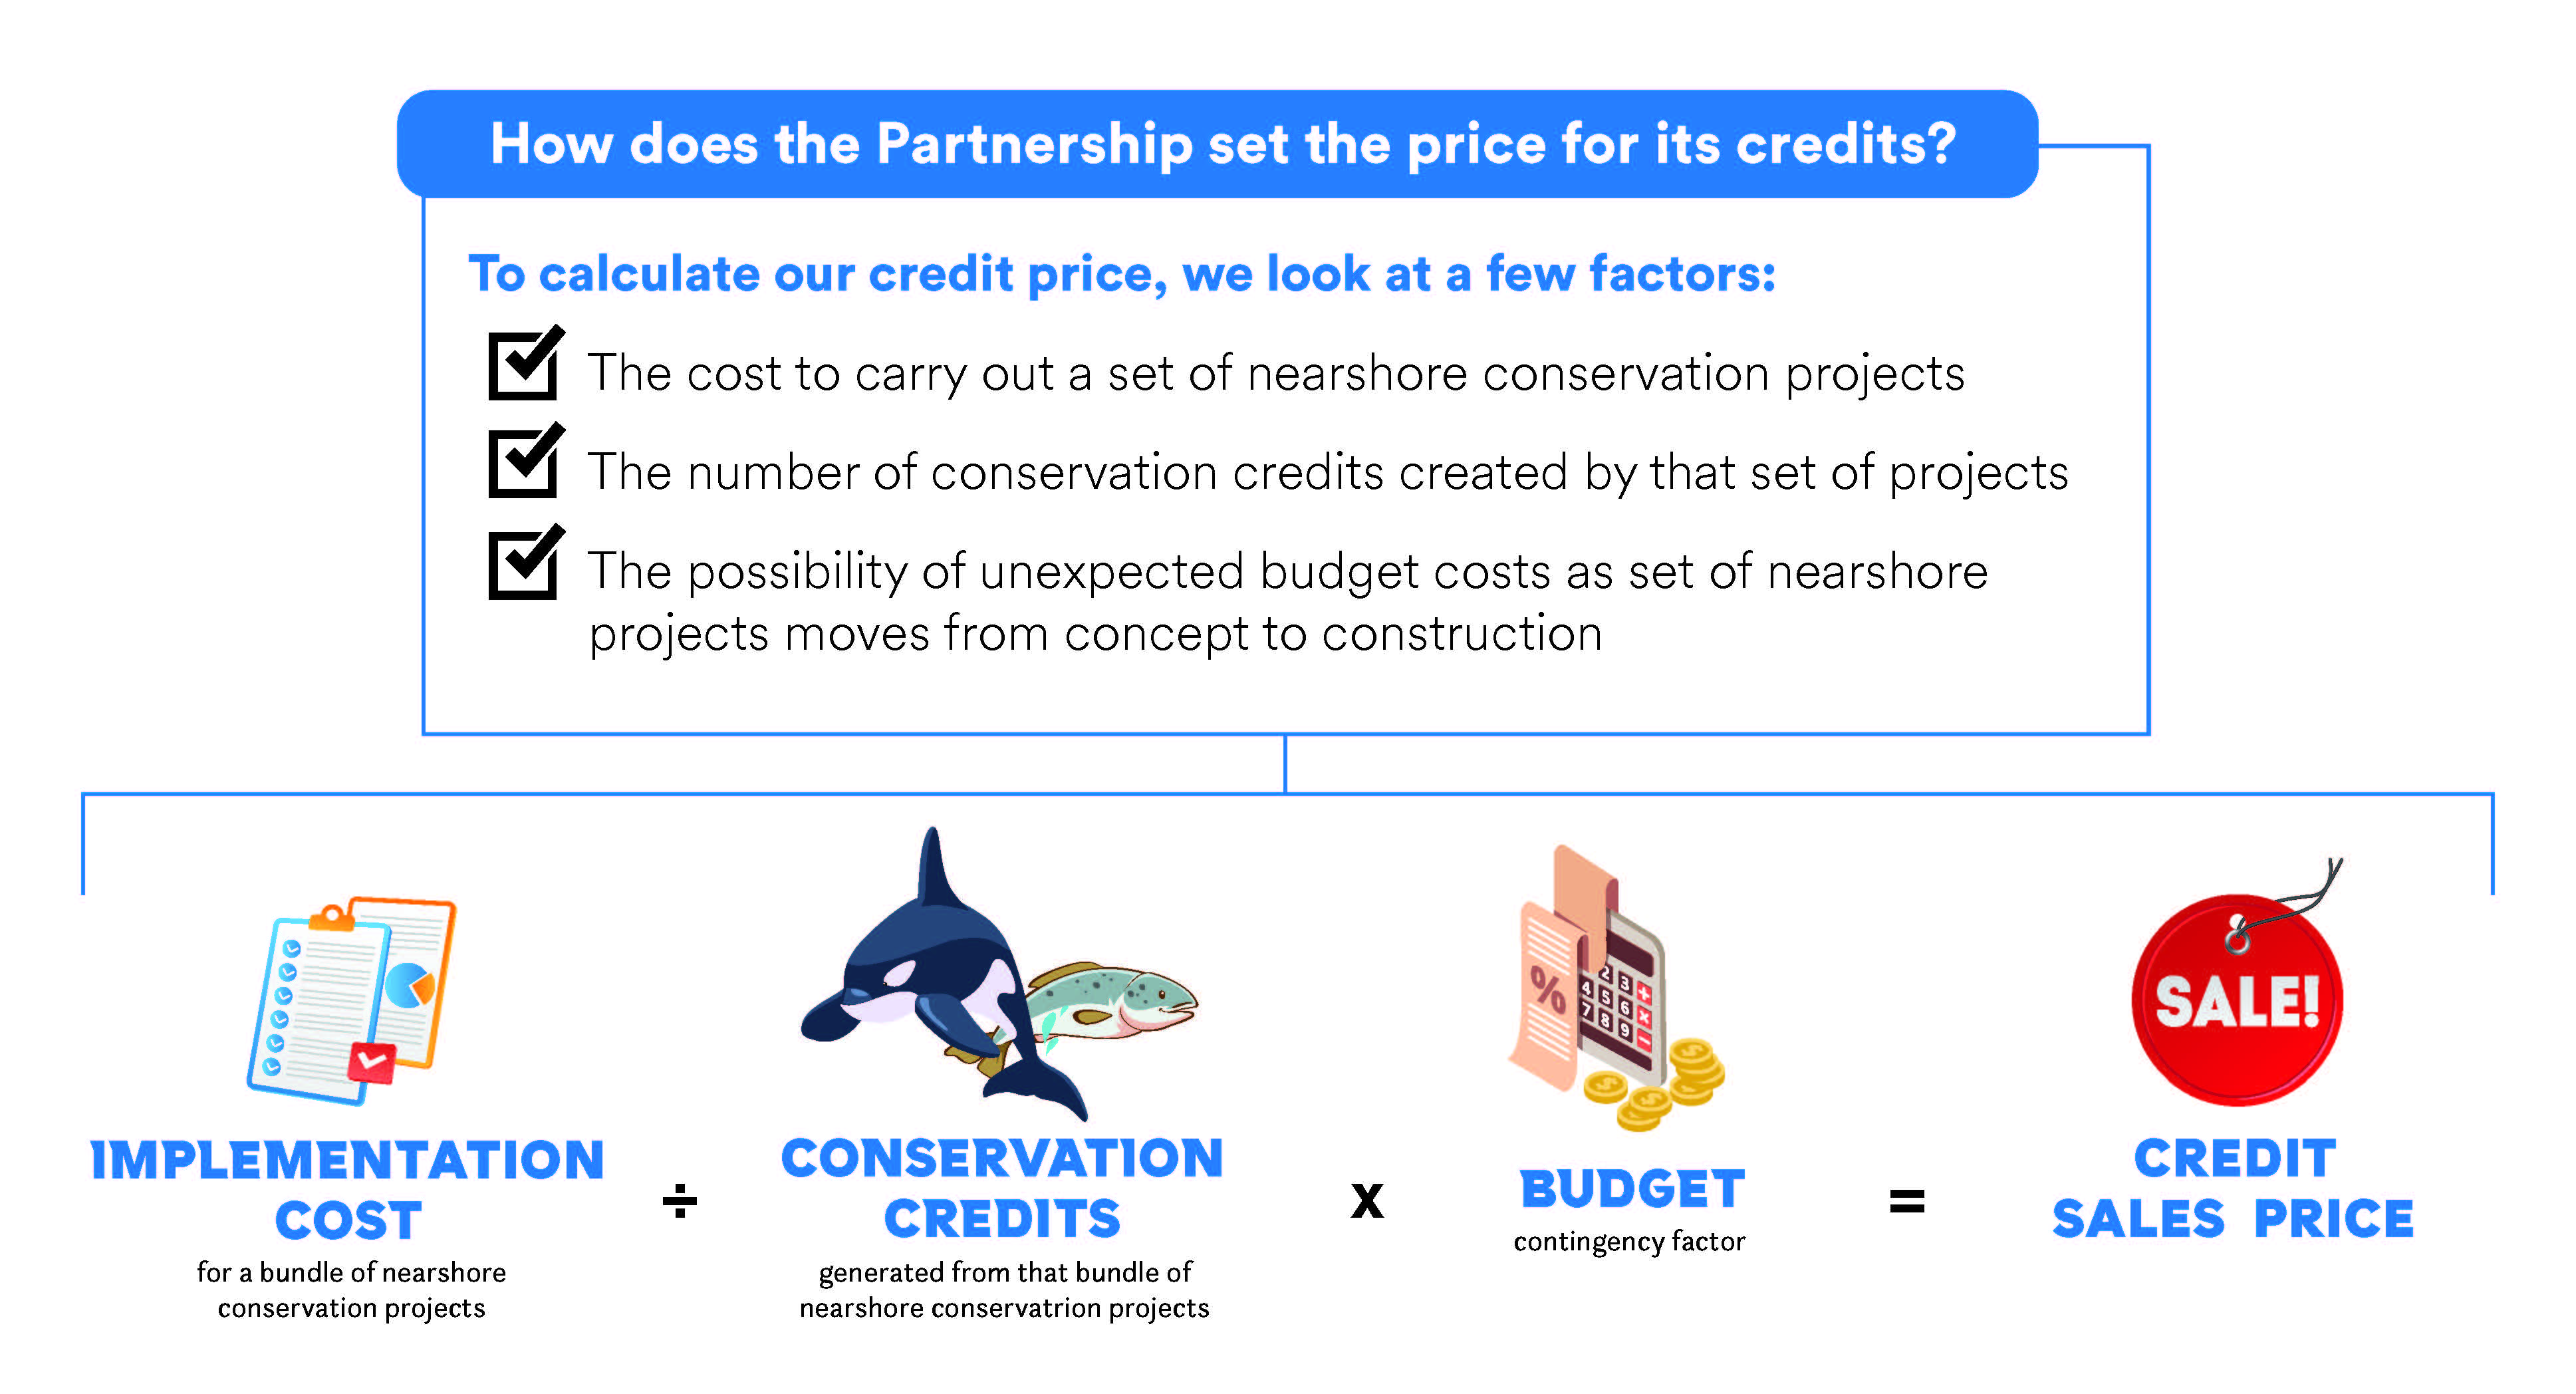 A graphic that shows how the Partnership sets the price for conservation credits. The graphic includes a checklist that shows the Partnership looks at a few factors to determine the credit price, including the cost to carry out a set of nearshore conservation projects, the number of conservation credits created by that set of projects, and the possibility of unexpected budget costs as the set of nearshore projects moves from concept to completion. The graphic includes a visualization of that checklist, showing a clipboard with the label Implementation Cost then the division sign and a drawing of an orca and a salmon with the label Conservation Credits then the multiplication sign and a drawing of a calculator with coins and a receipt and the label Budget then an equals sign and a drawing of a sales tag with the label Credit Sales Price.